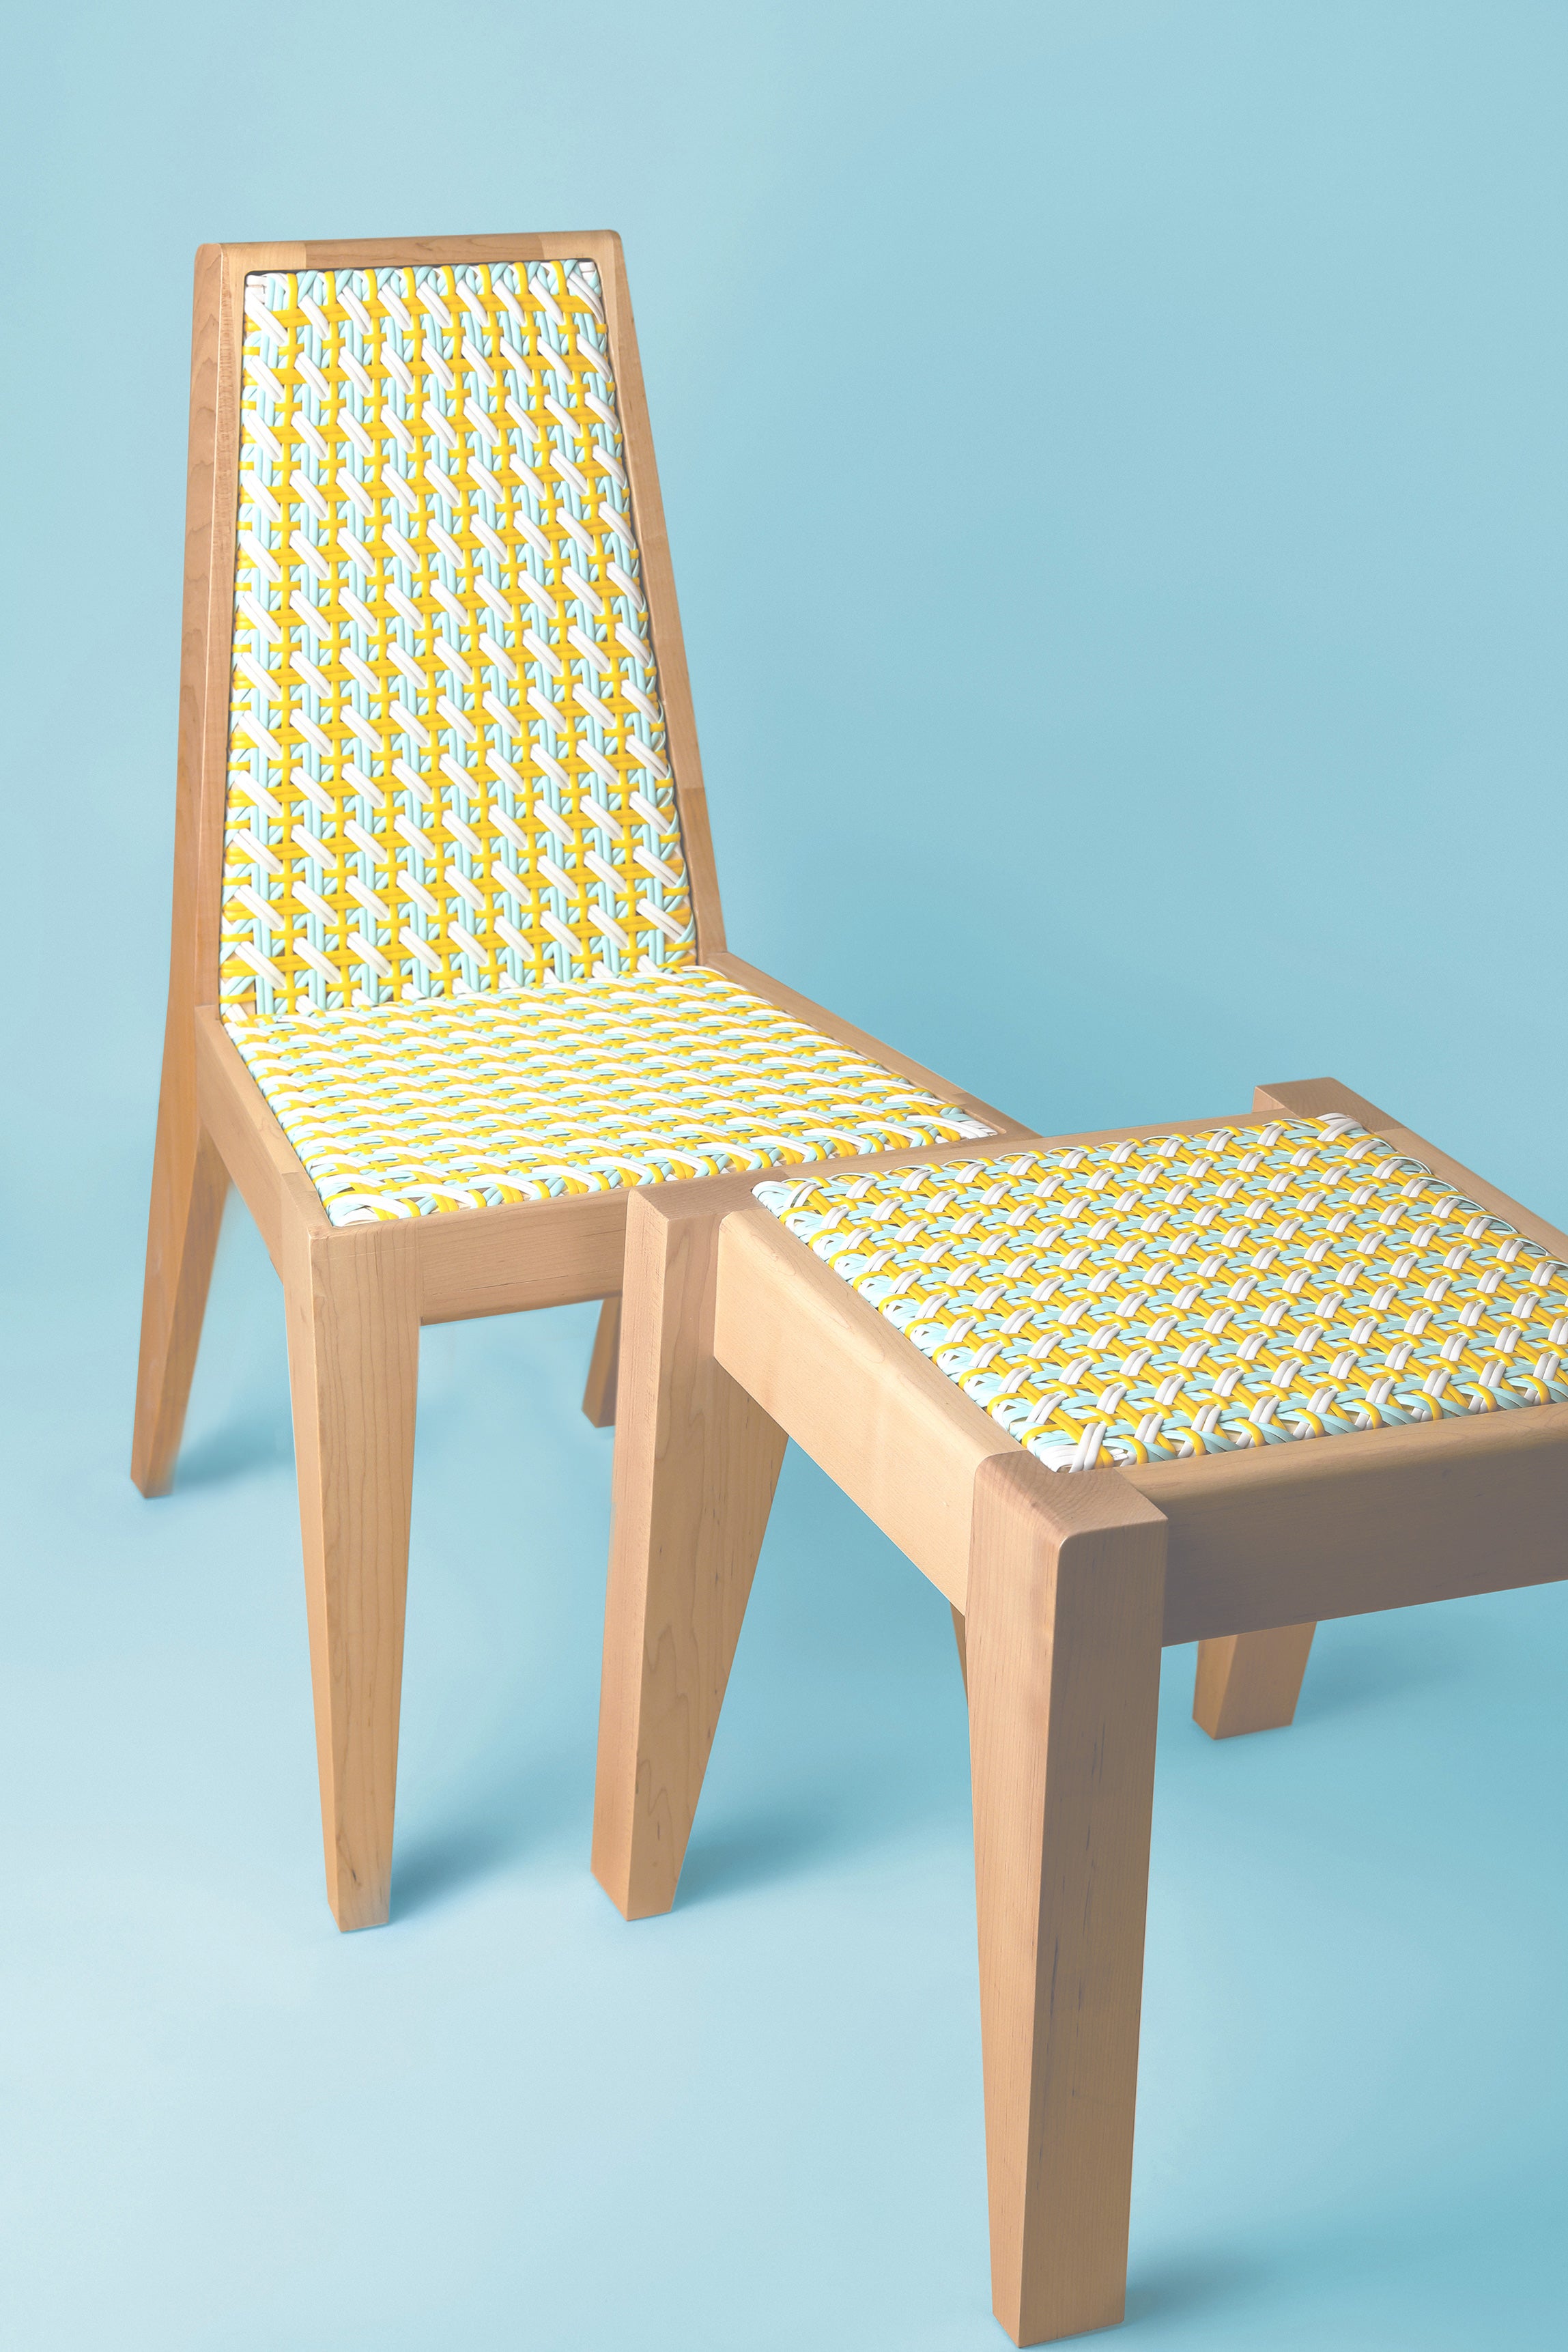 Elias stool and Dina chair from the Beiruti collection of caned timber chairs made in Lebanon designed by Adam Nathaniel Furman